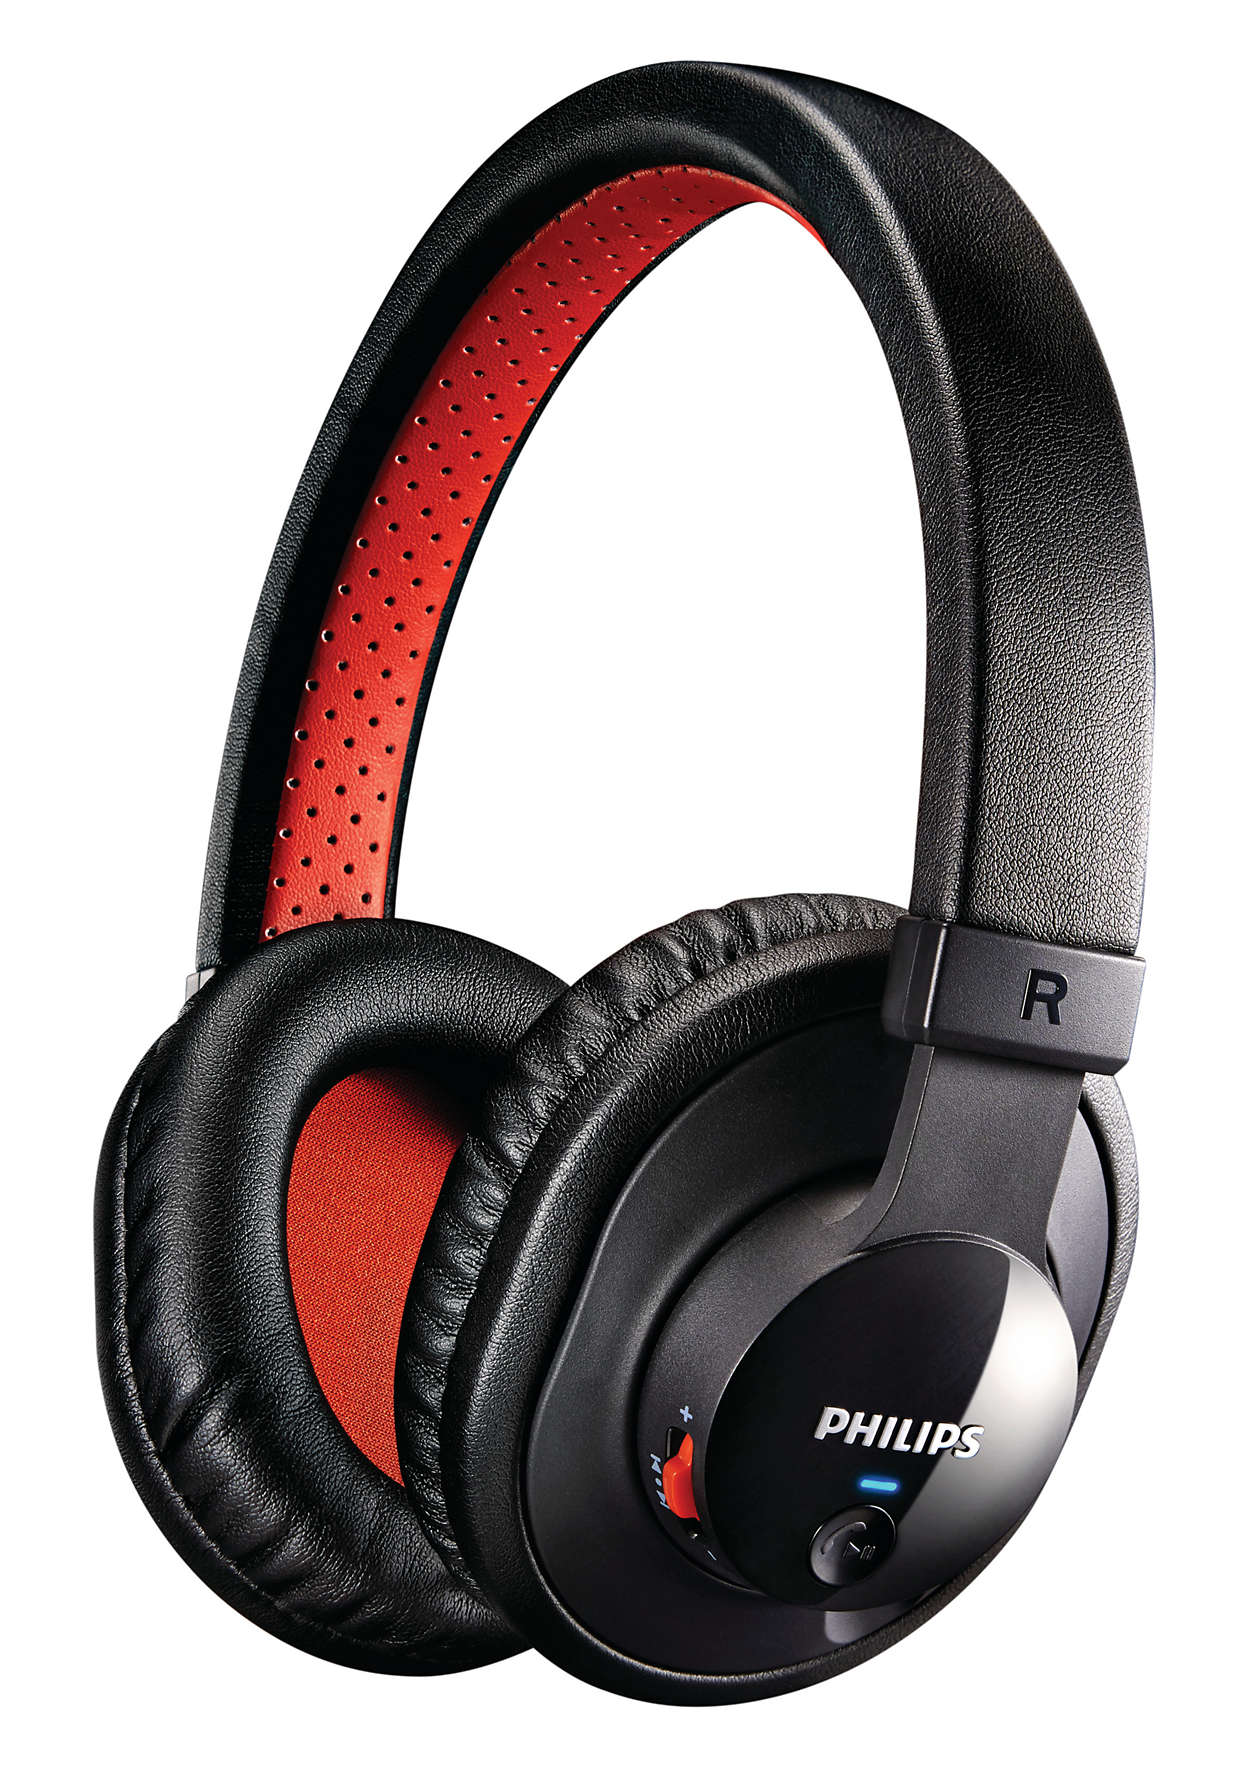 White Wireless Philips SHB7000 Bluetooth Stereo Headset Black/Red 